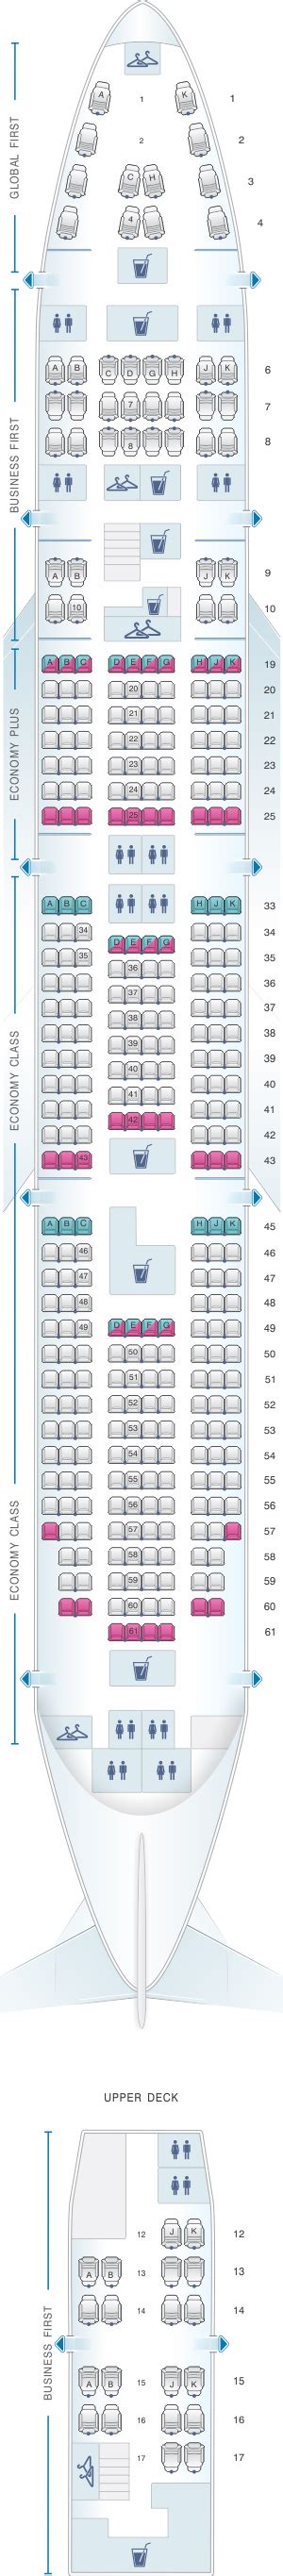 Seat Map United Airlines Boeing B747 400